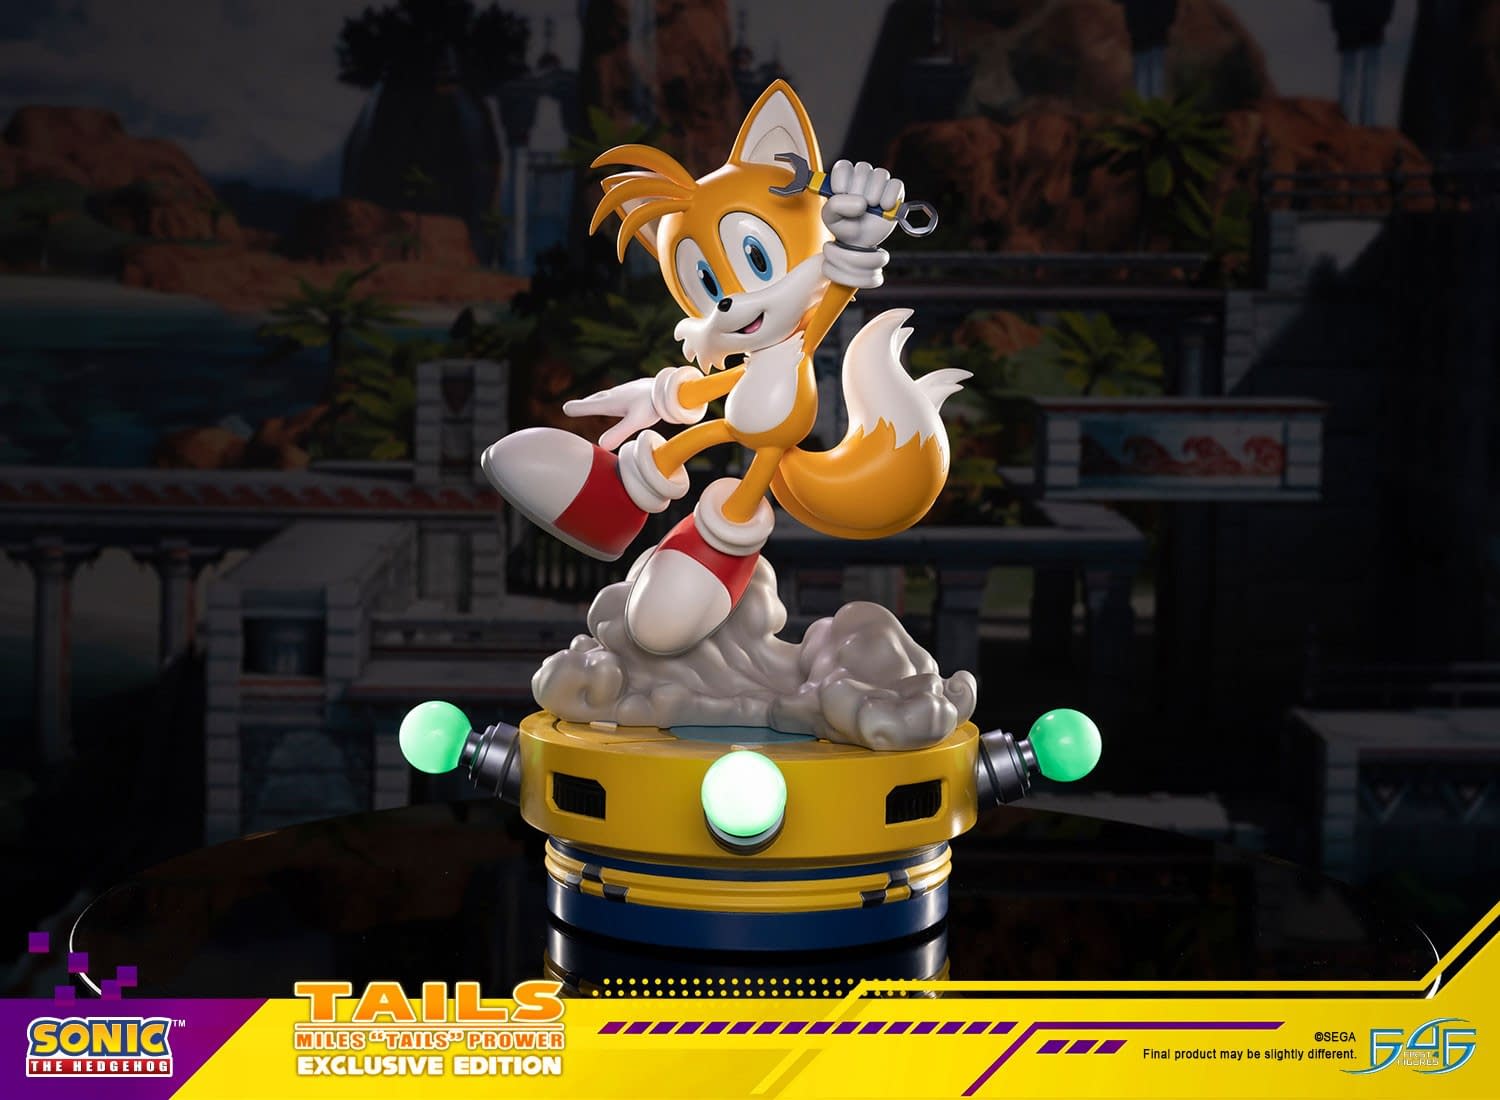 Tails Saves the Day with New Sonic the Hedgehog First 4 Figures Statue 